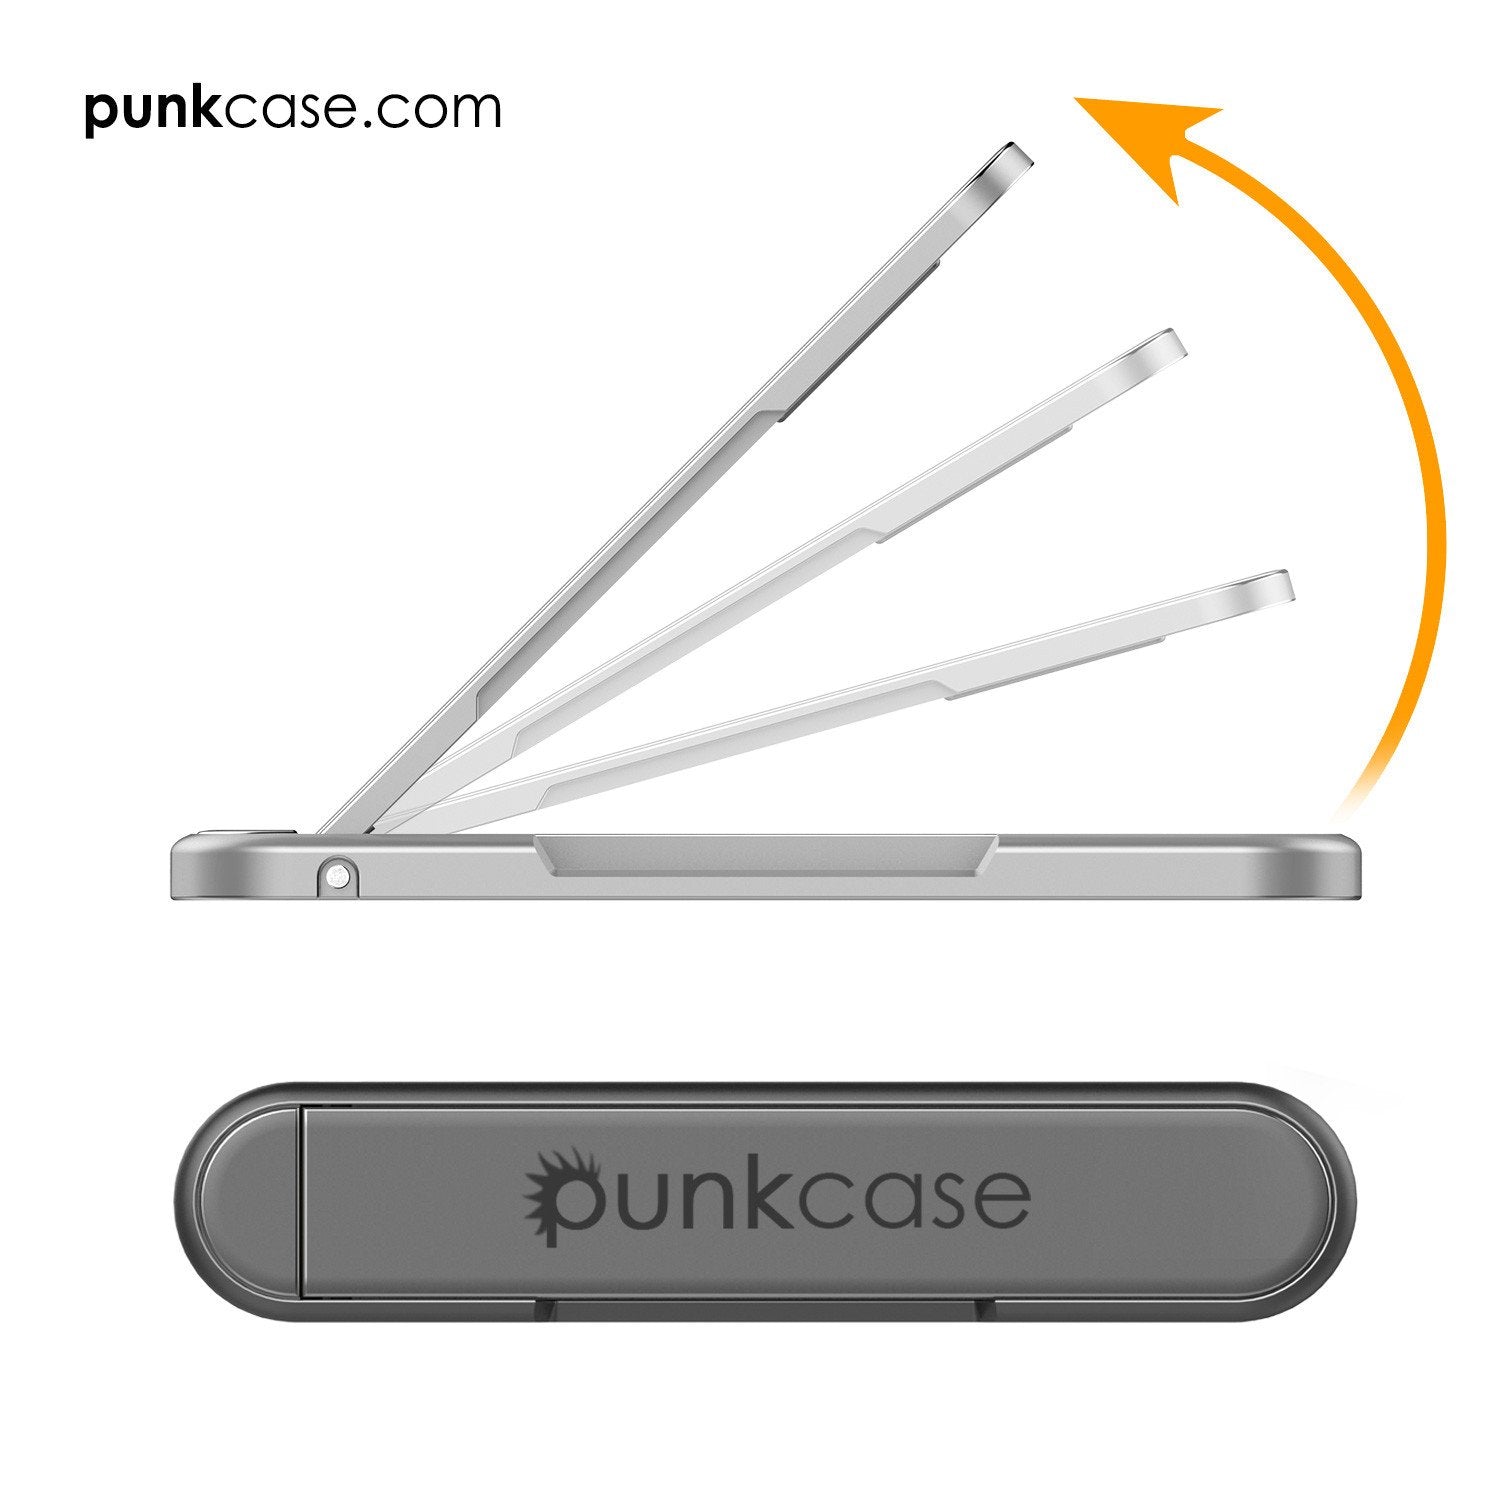 PUNKCASE FlickStick Universal Cell Phone Kickstand for all Mobile Phones & Cases with Flat Backs, One Finger Operation (Charcoal)